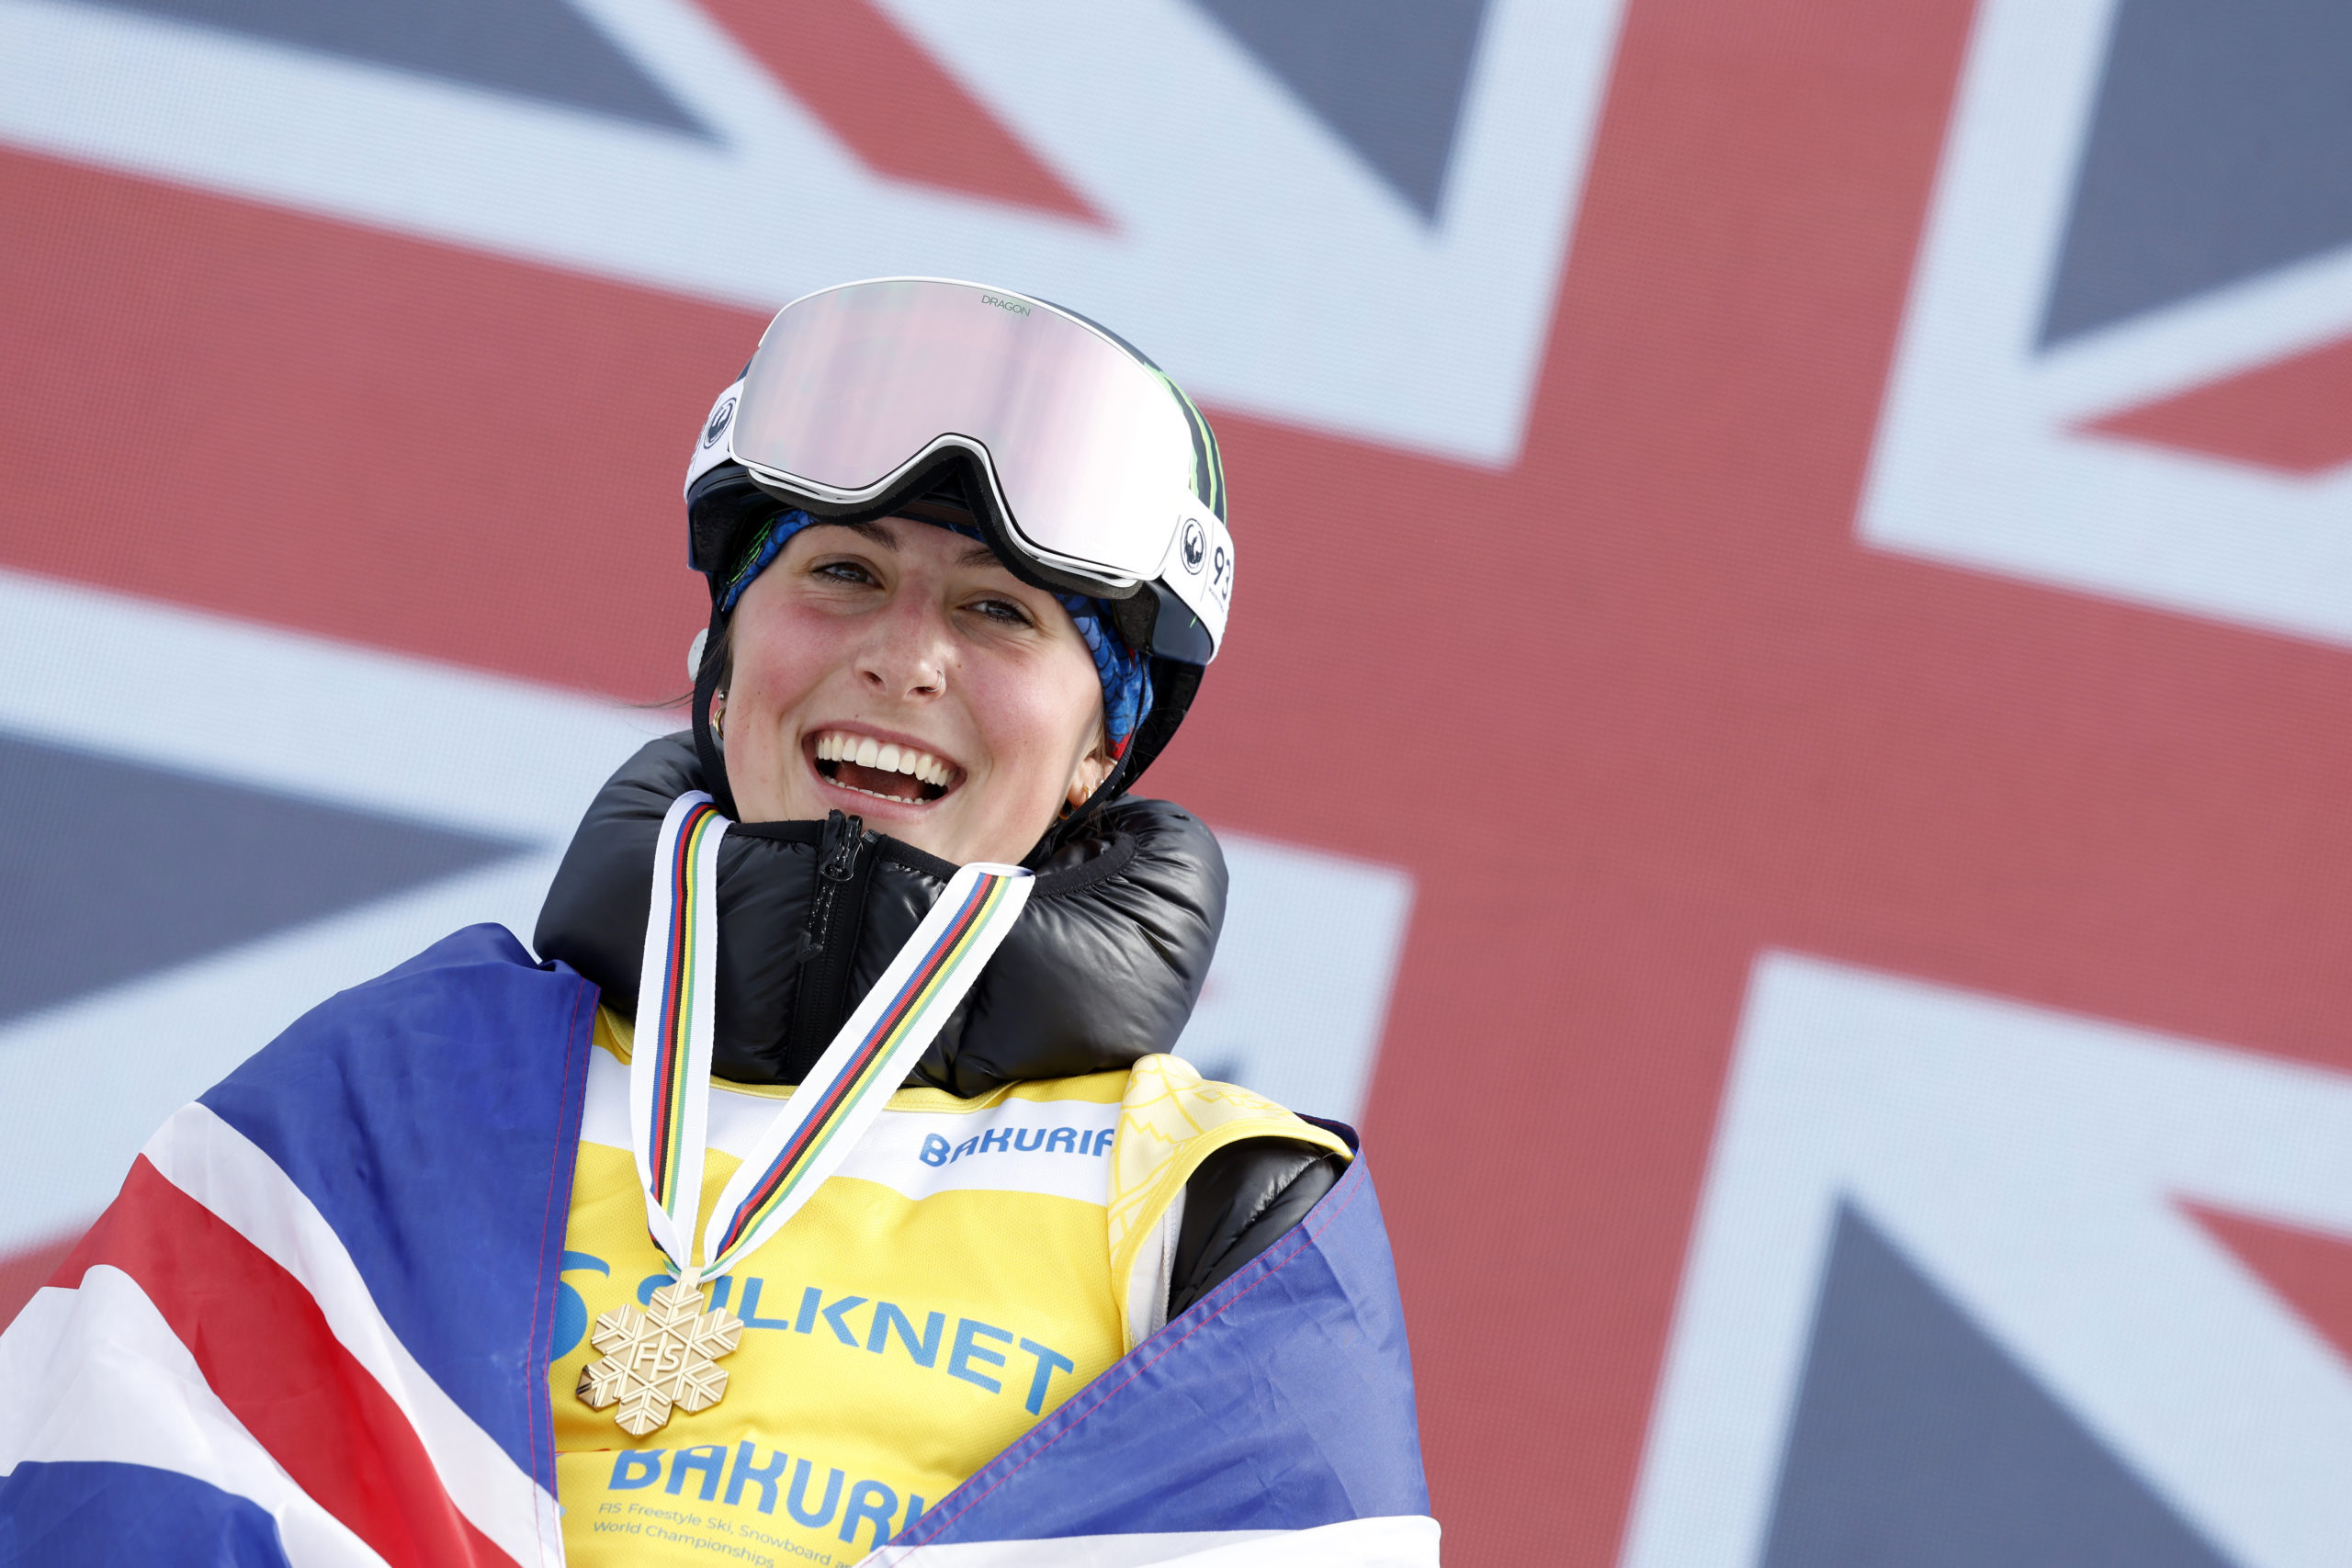 GBS Results Round-Up: A new World Champion, Para Alpine podiums, and more